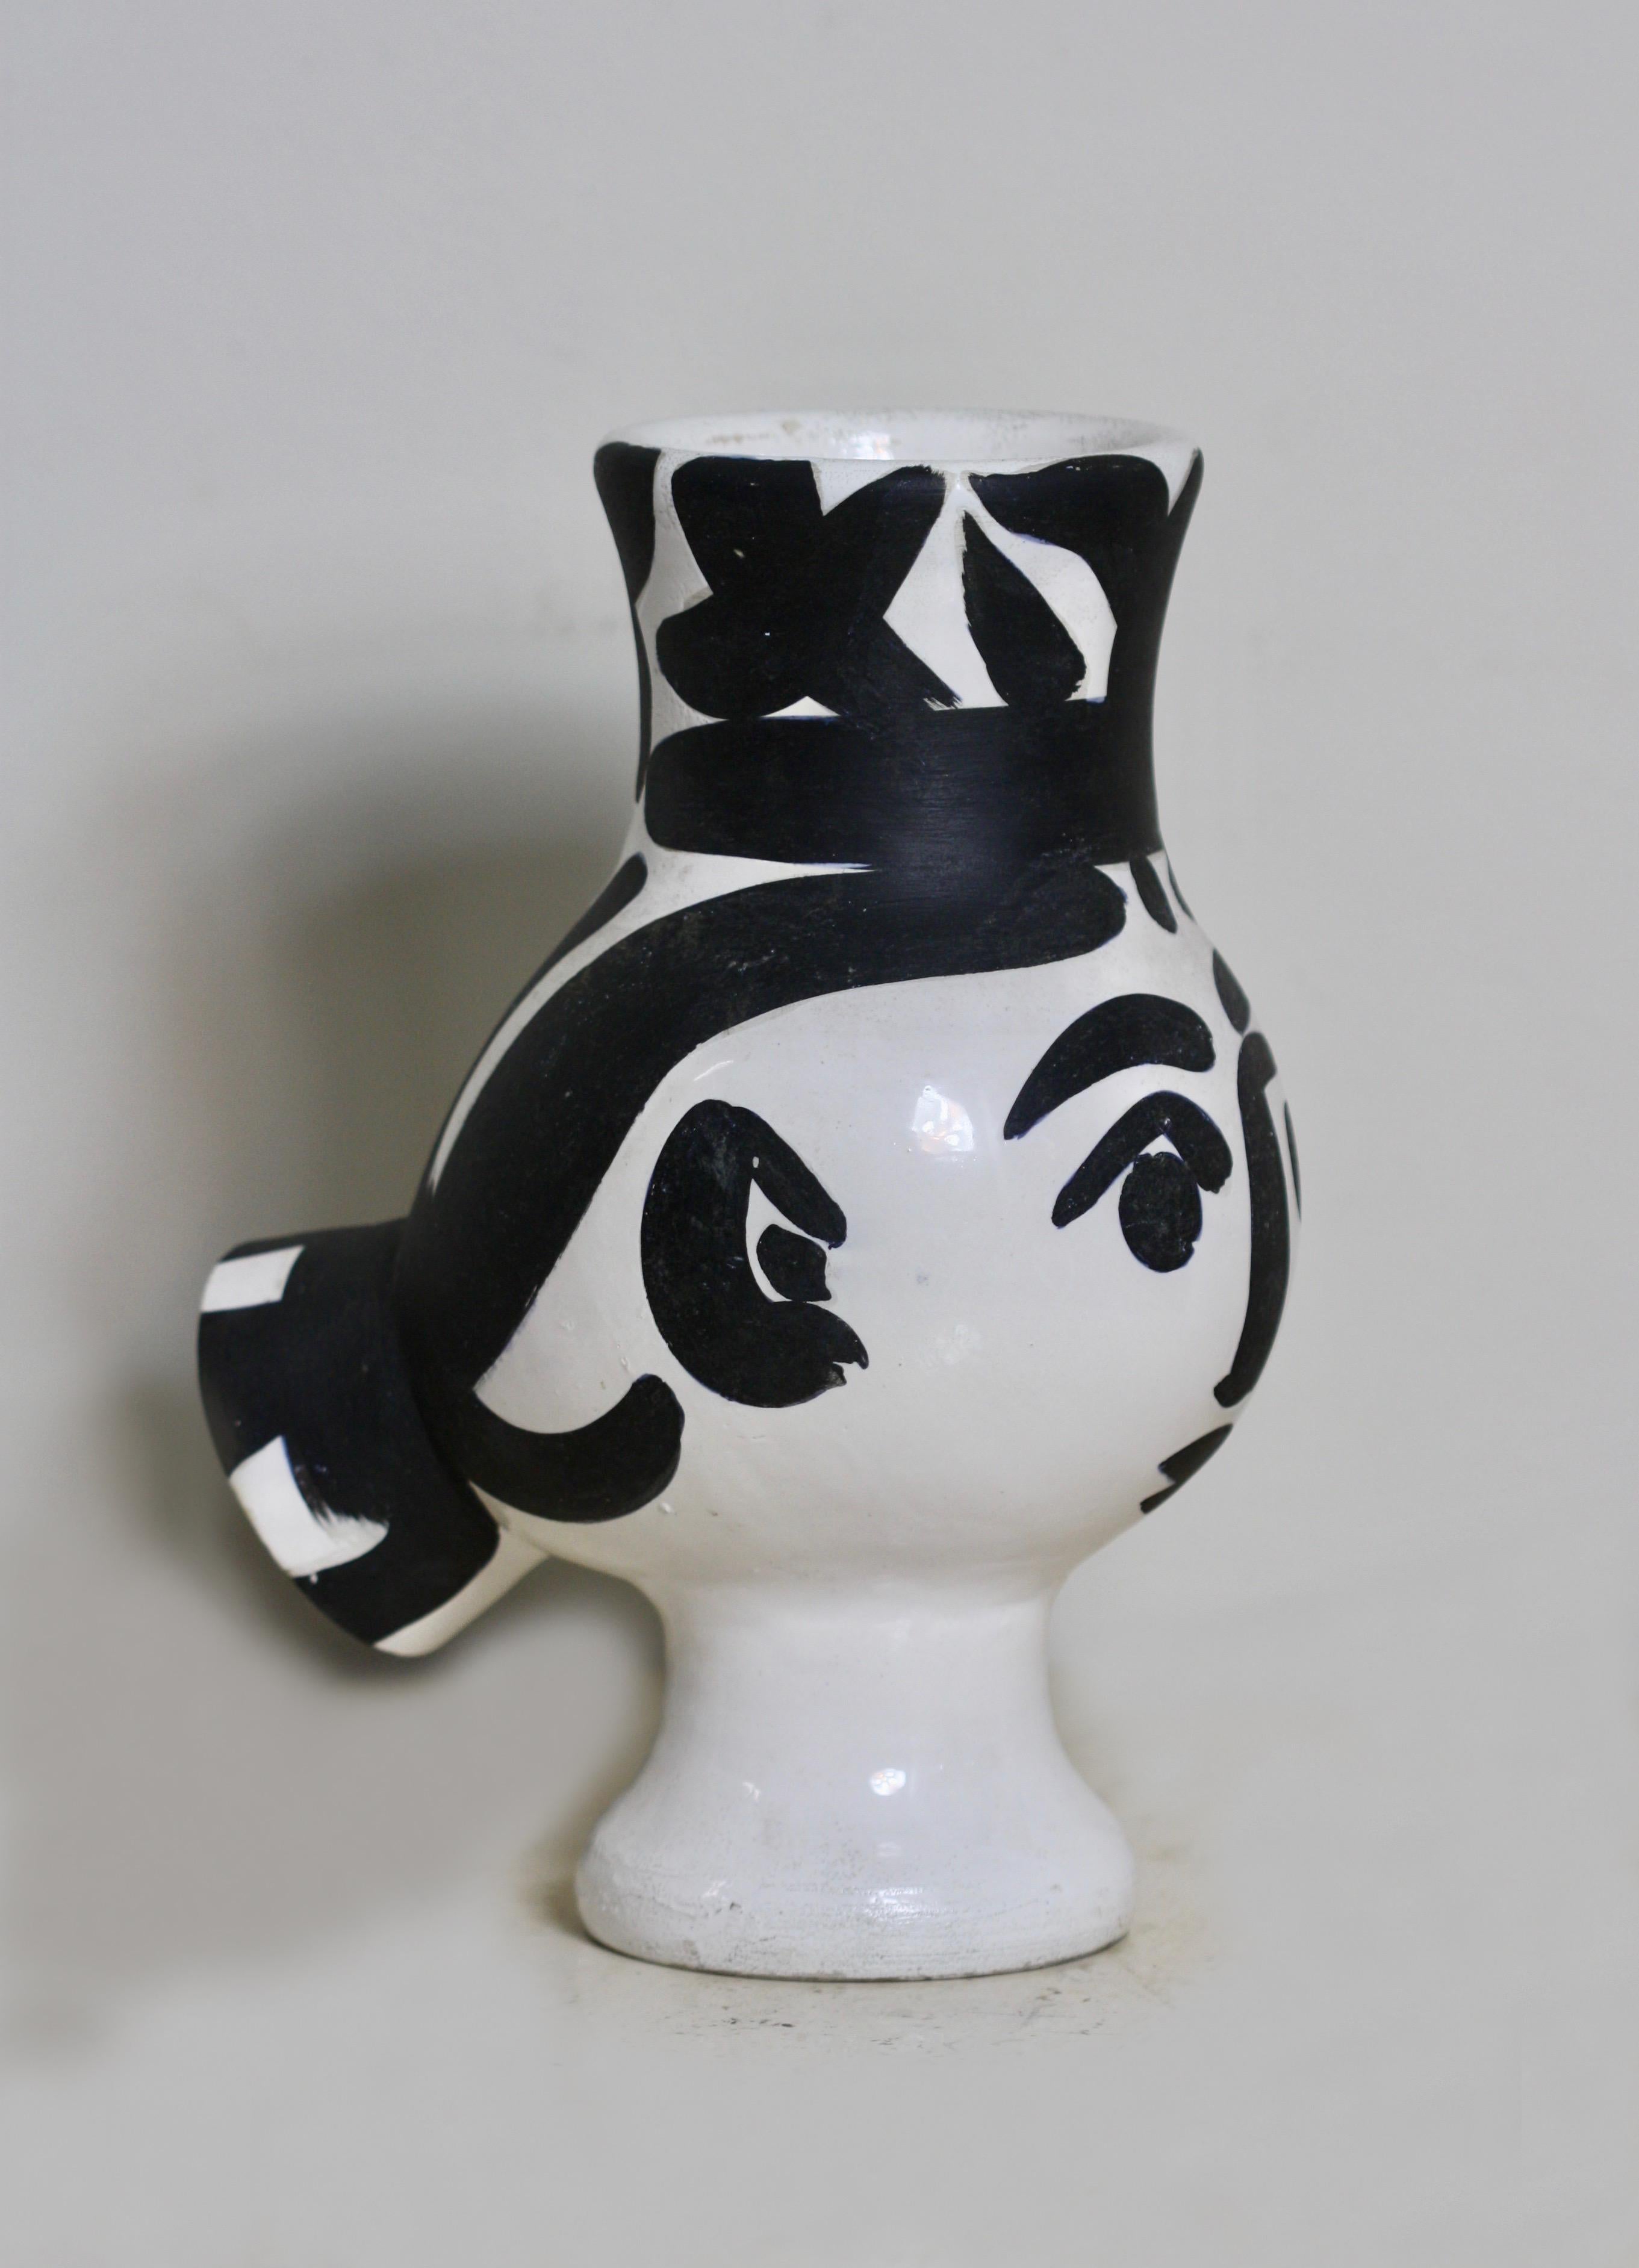 Pablo Picasso (1881-1973)
Chouette Femme (A. R. 119)
Terre de faïence vase, 1951, from the edition of 500, partially glazed and painted, with the Edition Picasso and Madoura stamps
Measures: Height 280mm 11in.